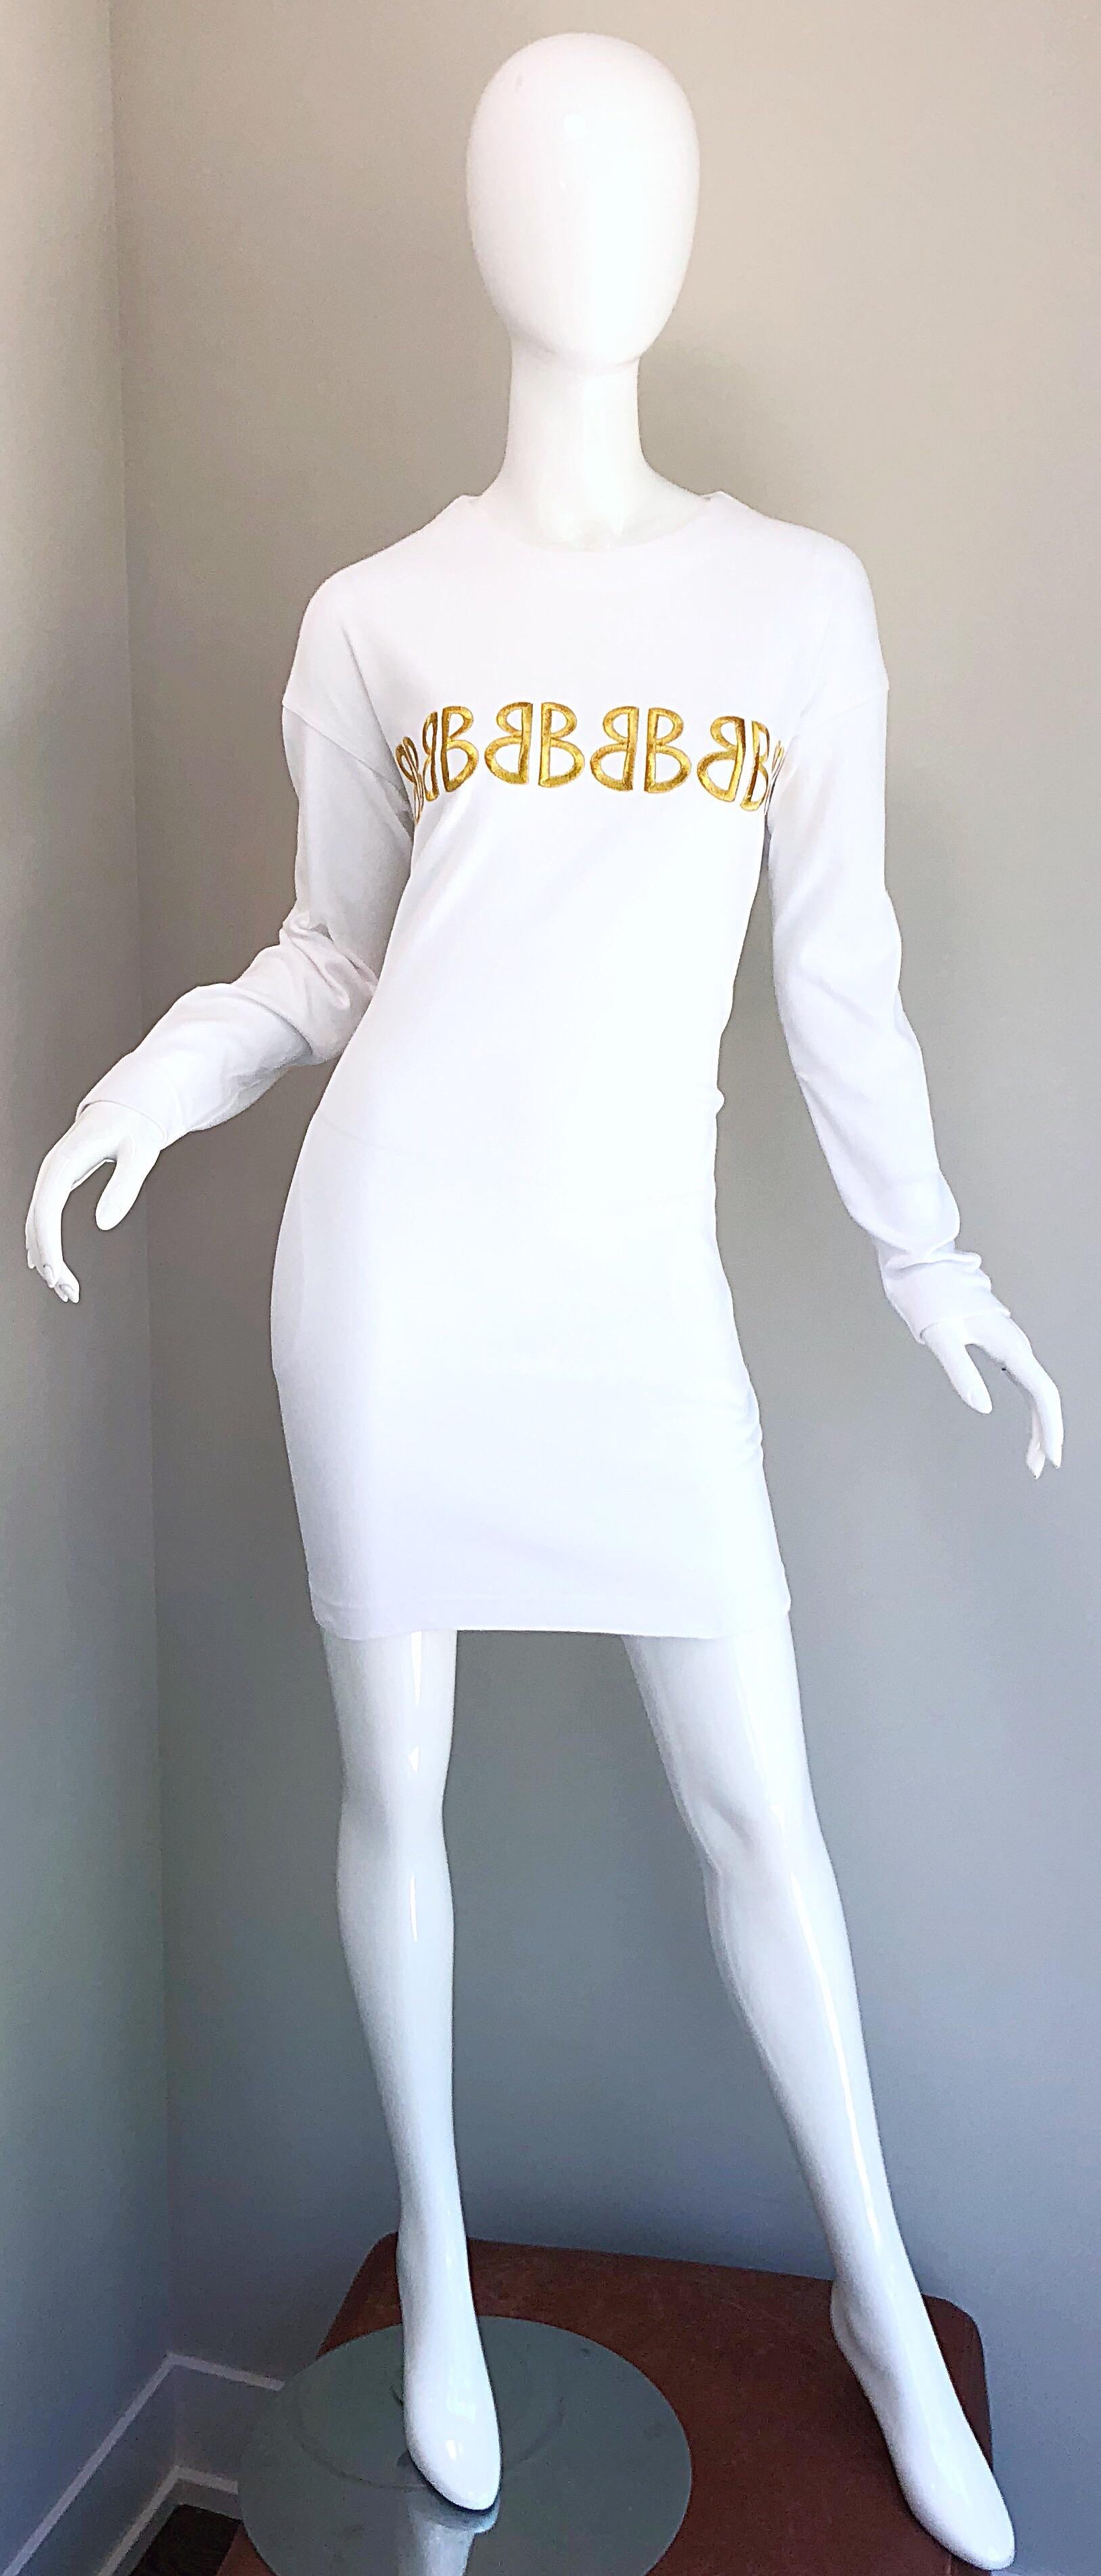 Awesome vintage 1990s BILL BLASS white and gold 'LOGO MANIA' embroidered cotton sweatshirt dress! Features the signature BB logo embroidered in gold above the bust. POCKETS at each side of the hip. Hidden zipper up the back with hook-and-eye